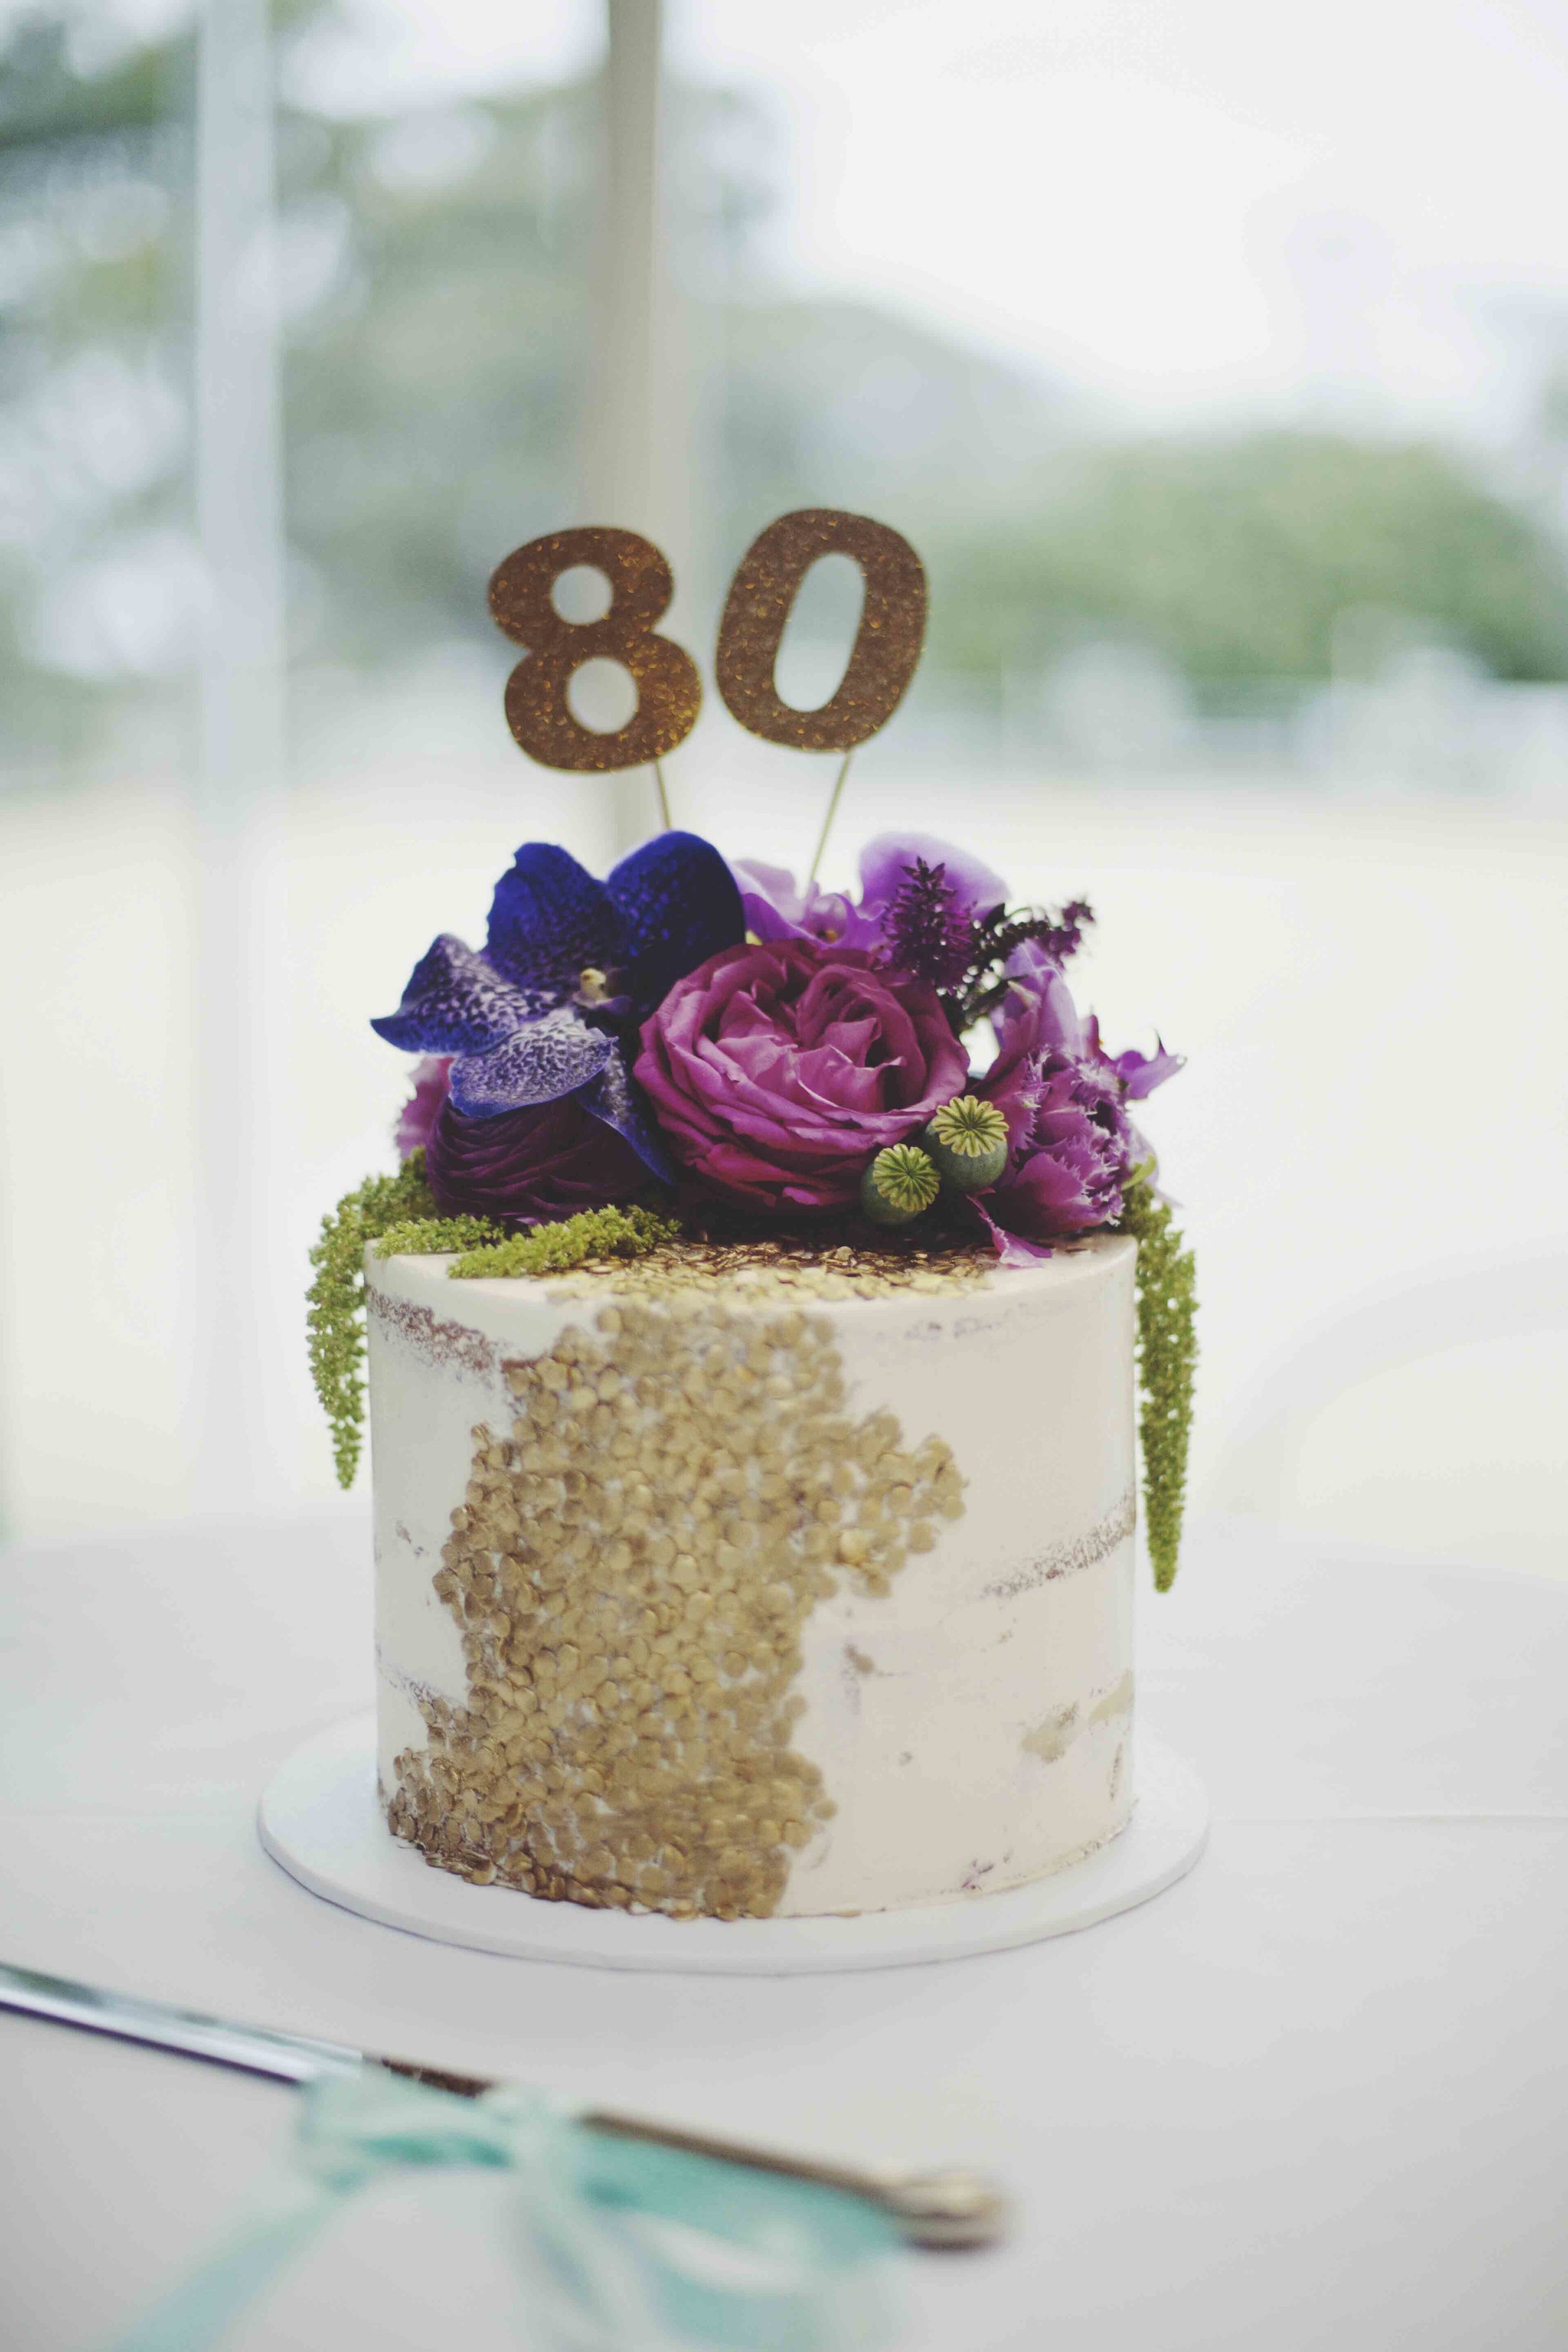 80th birthday party event photography captured in Sydney by The Paper Fox